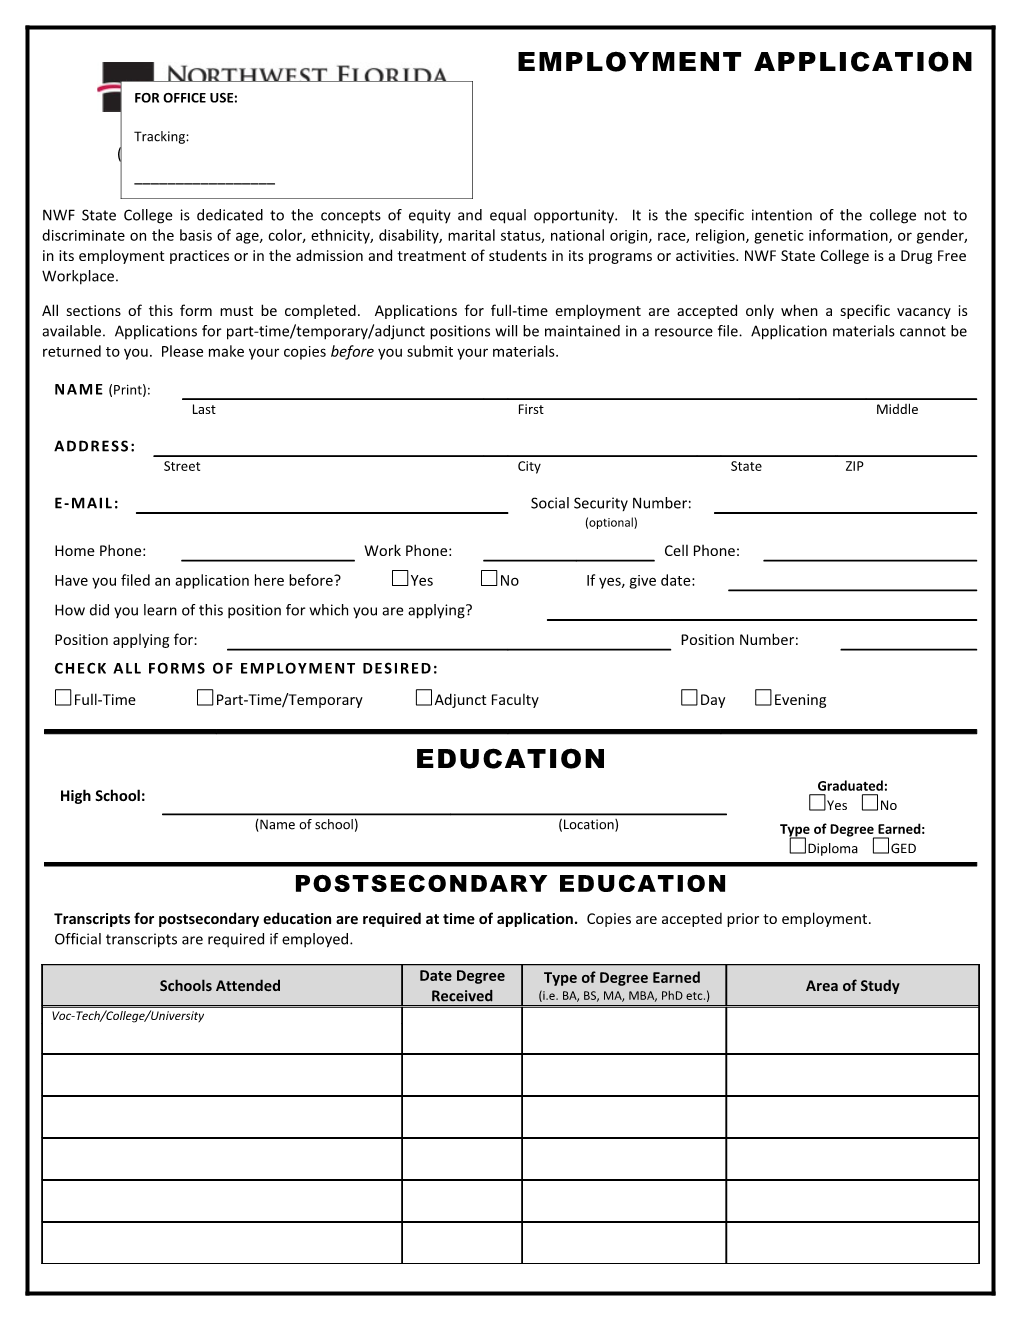 Resumes May Be Attached but Not in Lieu of Completing This Application